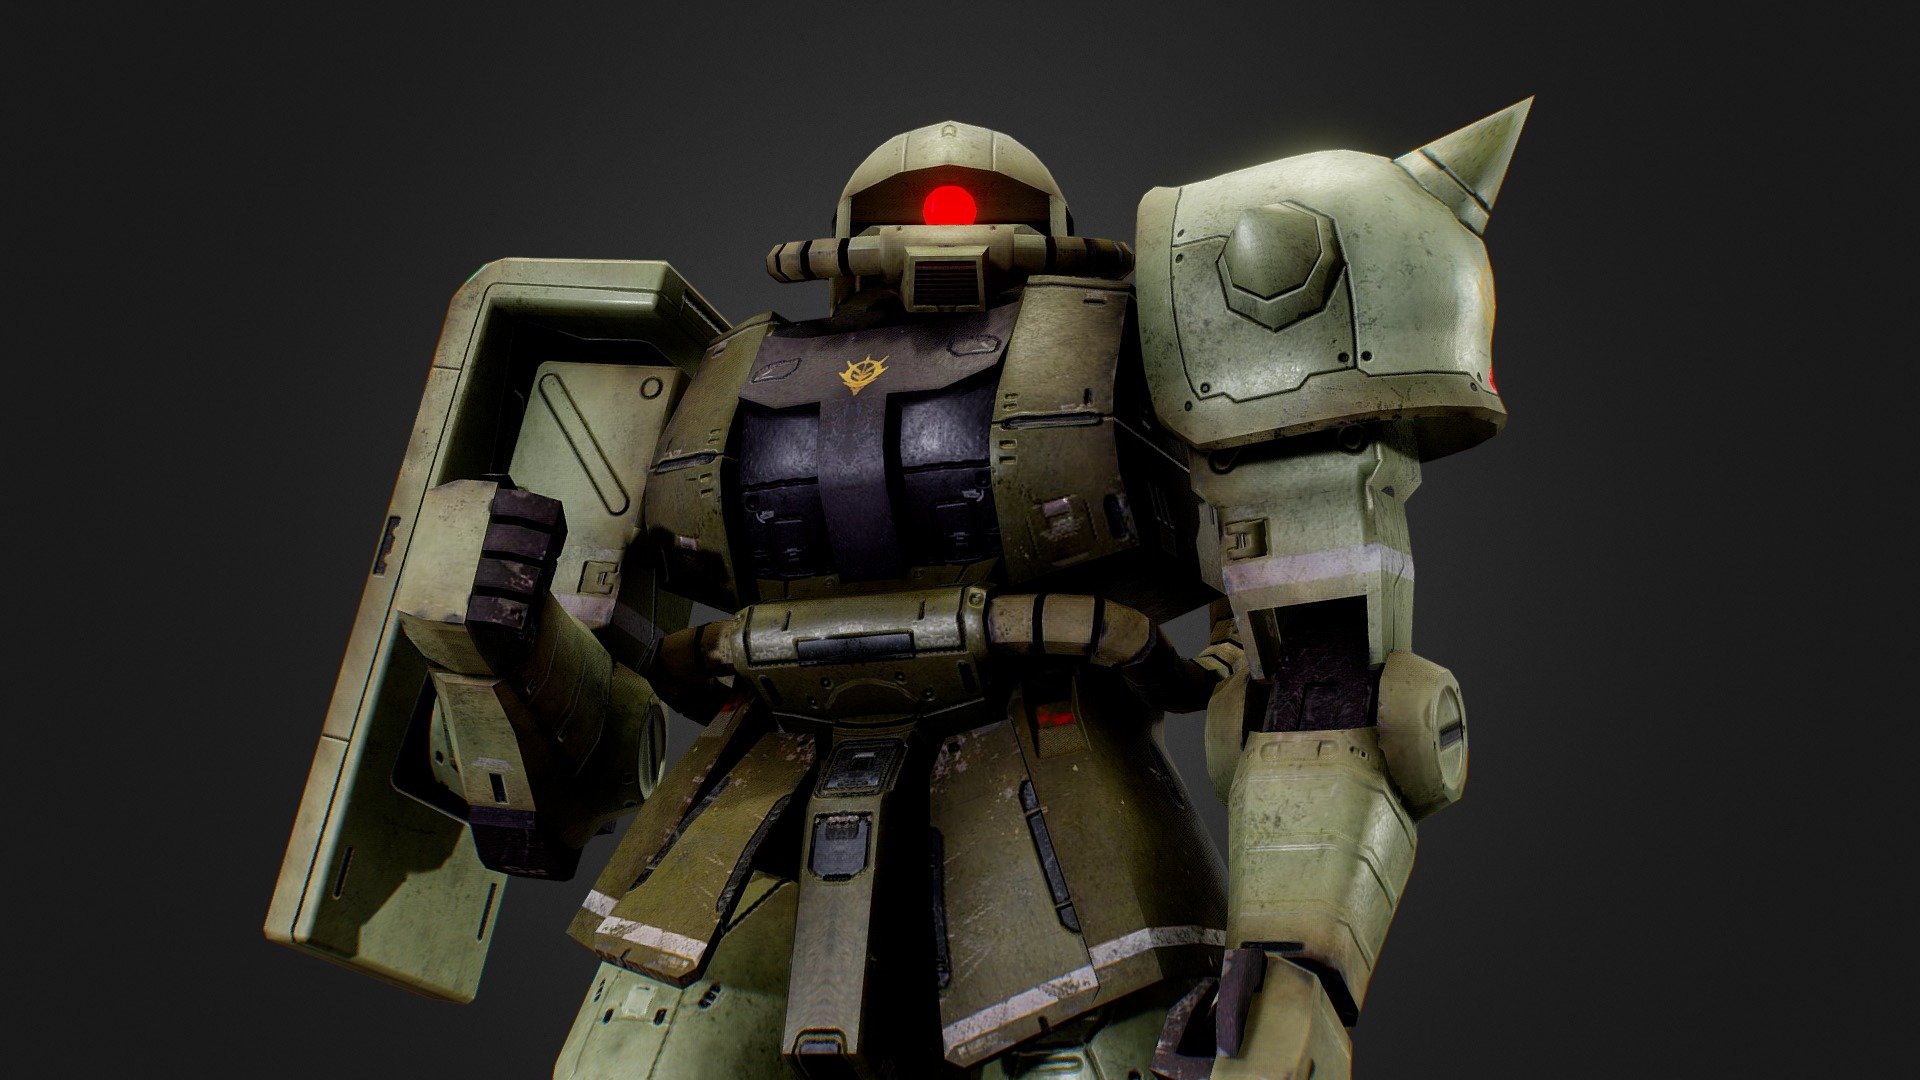 This model was made for One Year War mod of Hearts of Iron IV.

Our Mod Steam Home Page

https://steamcommunity.com/sharedfiles/filedetails/?id=2064985570 - MS-06 ZAKU II - 3D model by One Year War Mod (@hoi4oneyearwar) 3d model